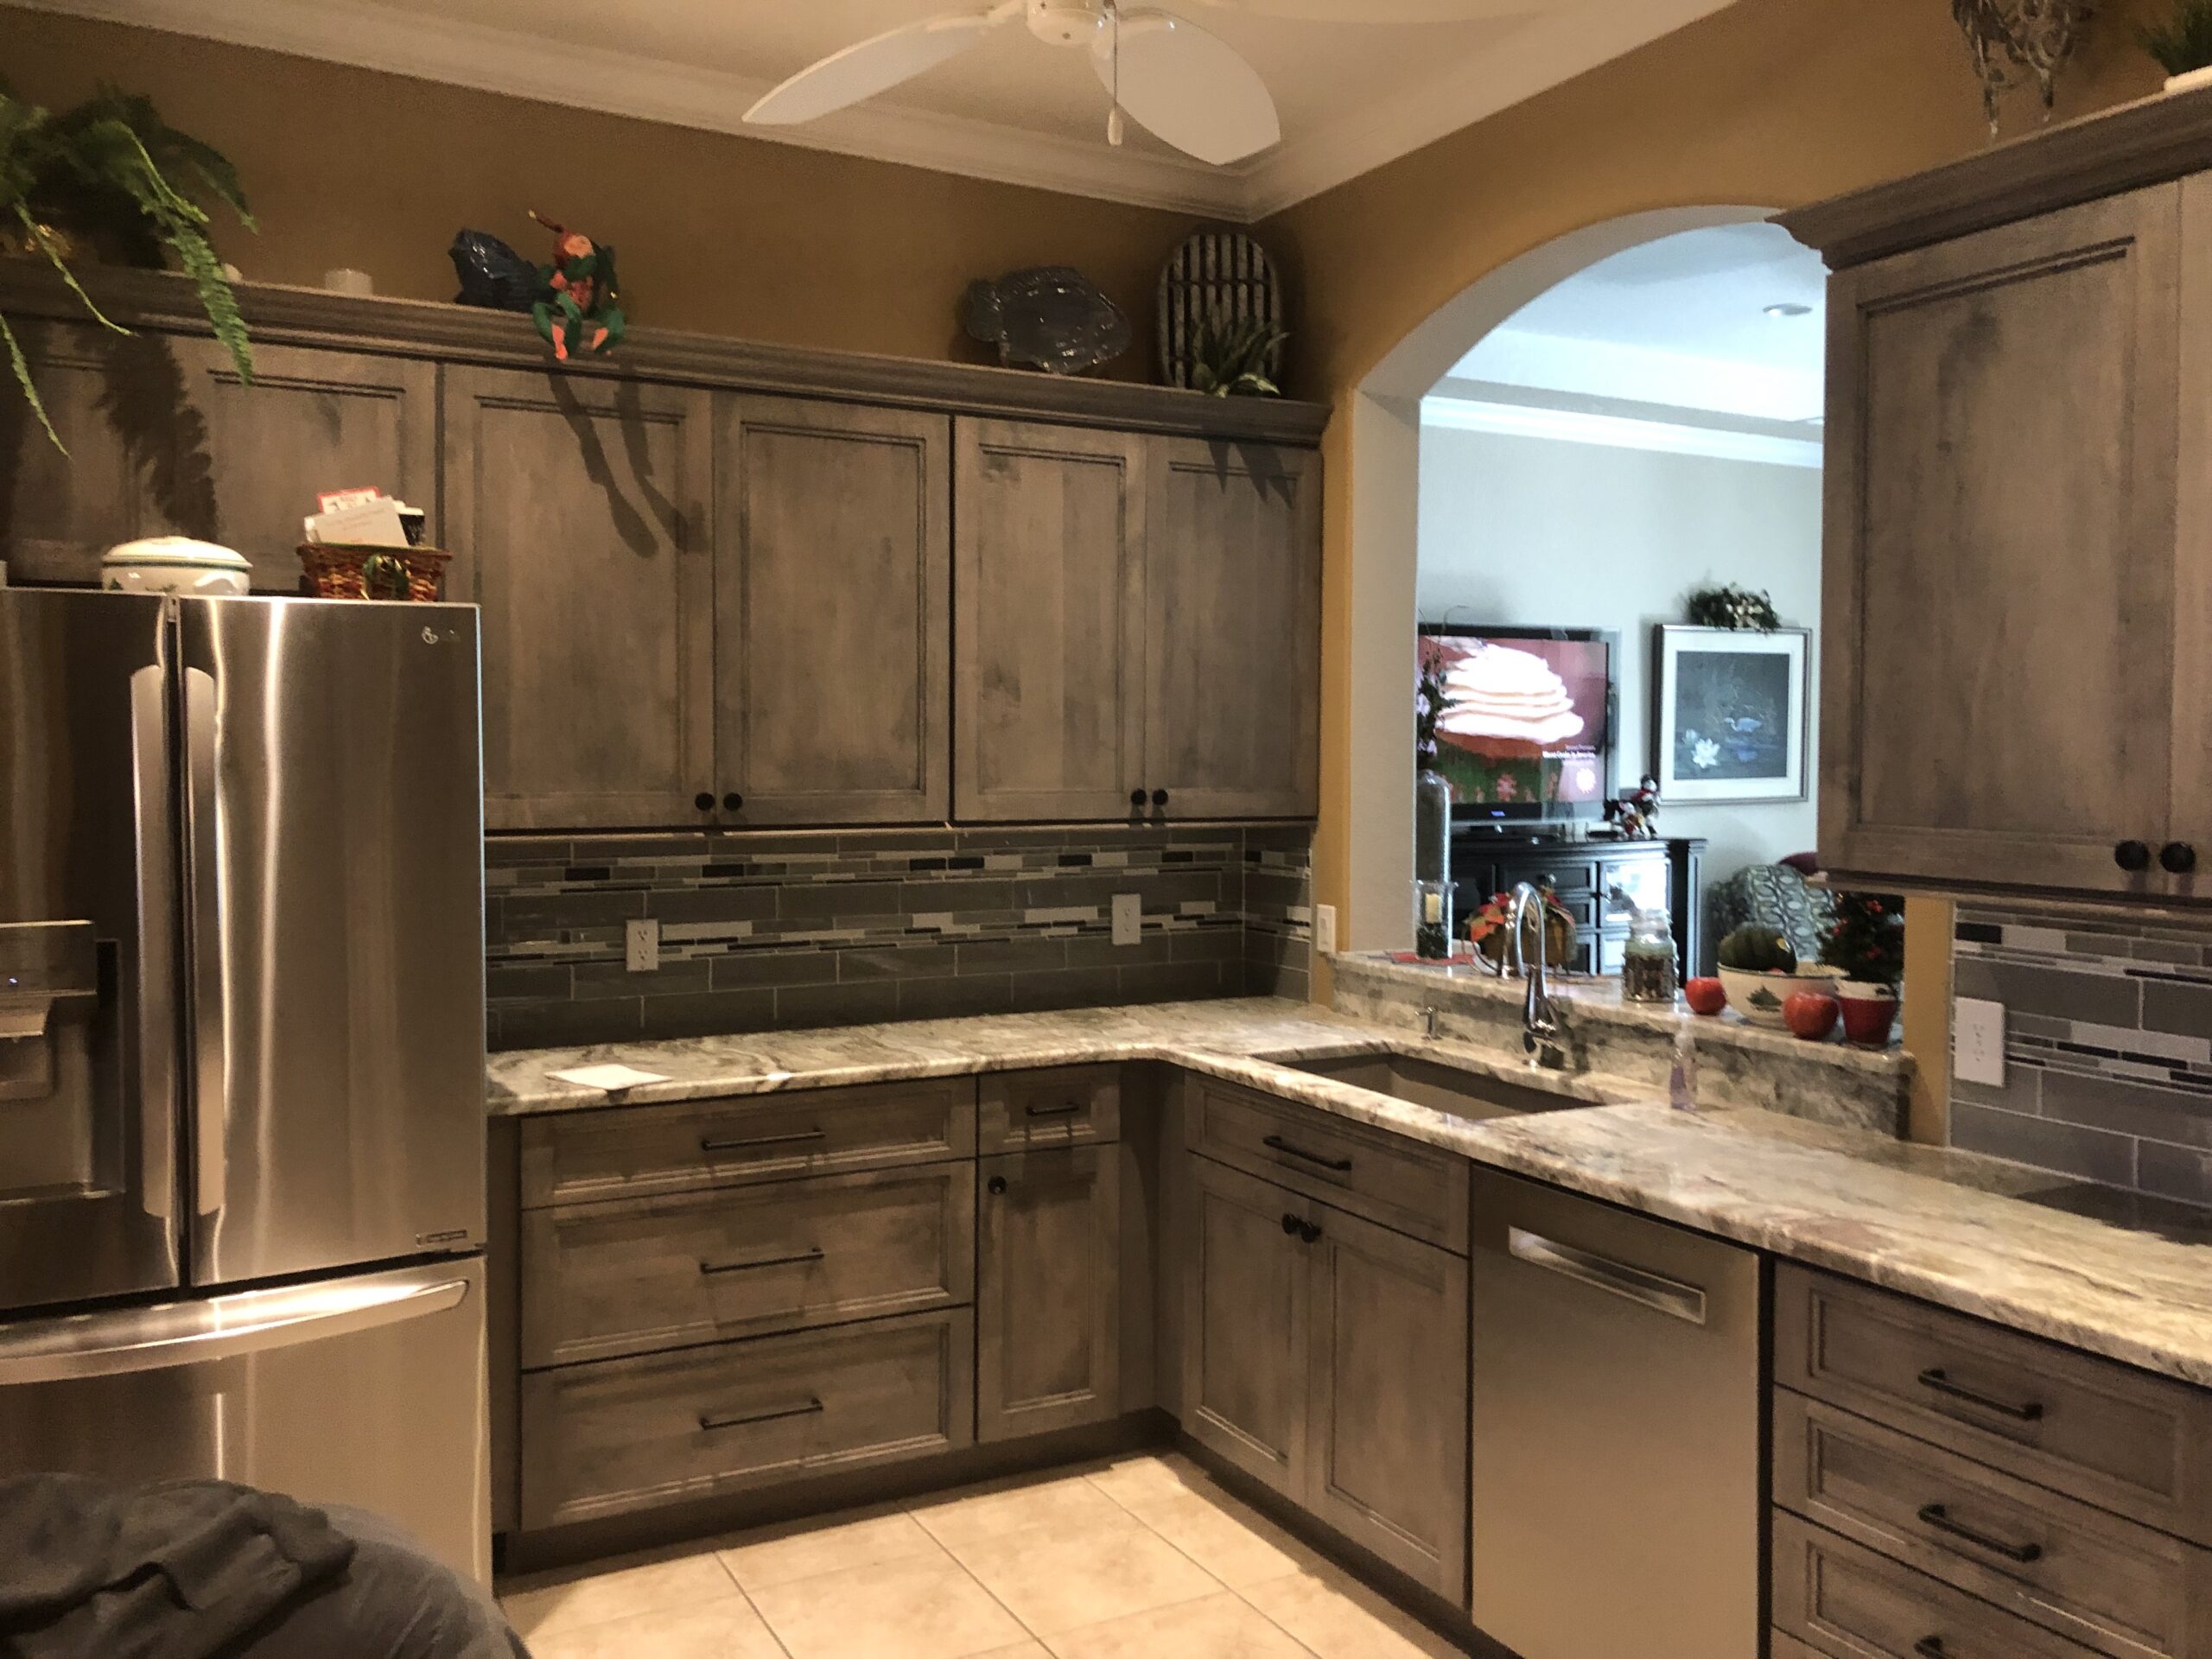 Modern, Stylish, and High Quality Stained Cherry Kitchen Cabinet Refacing in Indian Rocks